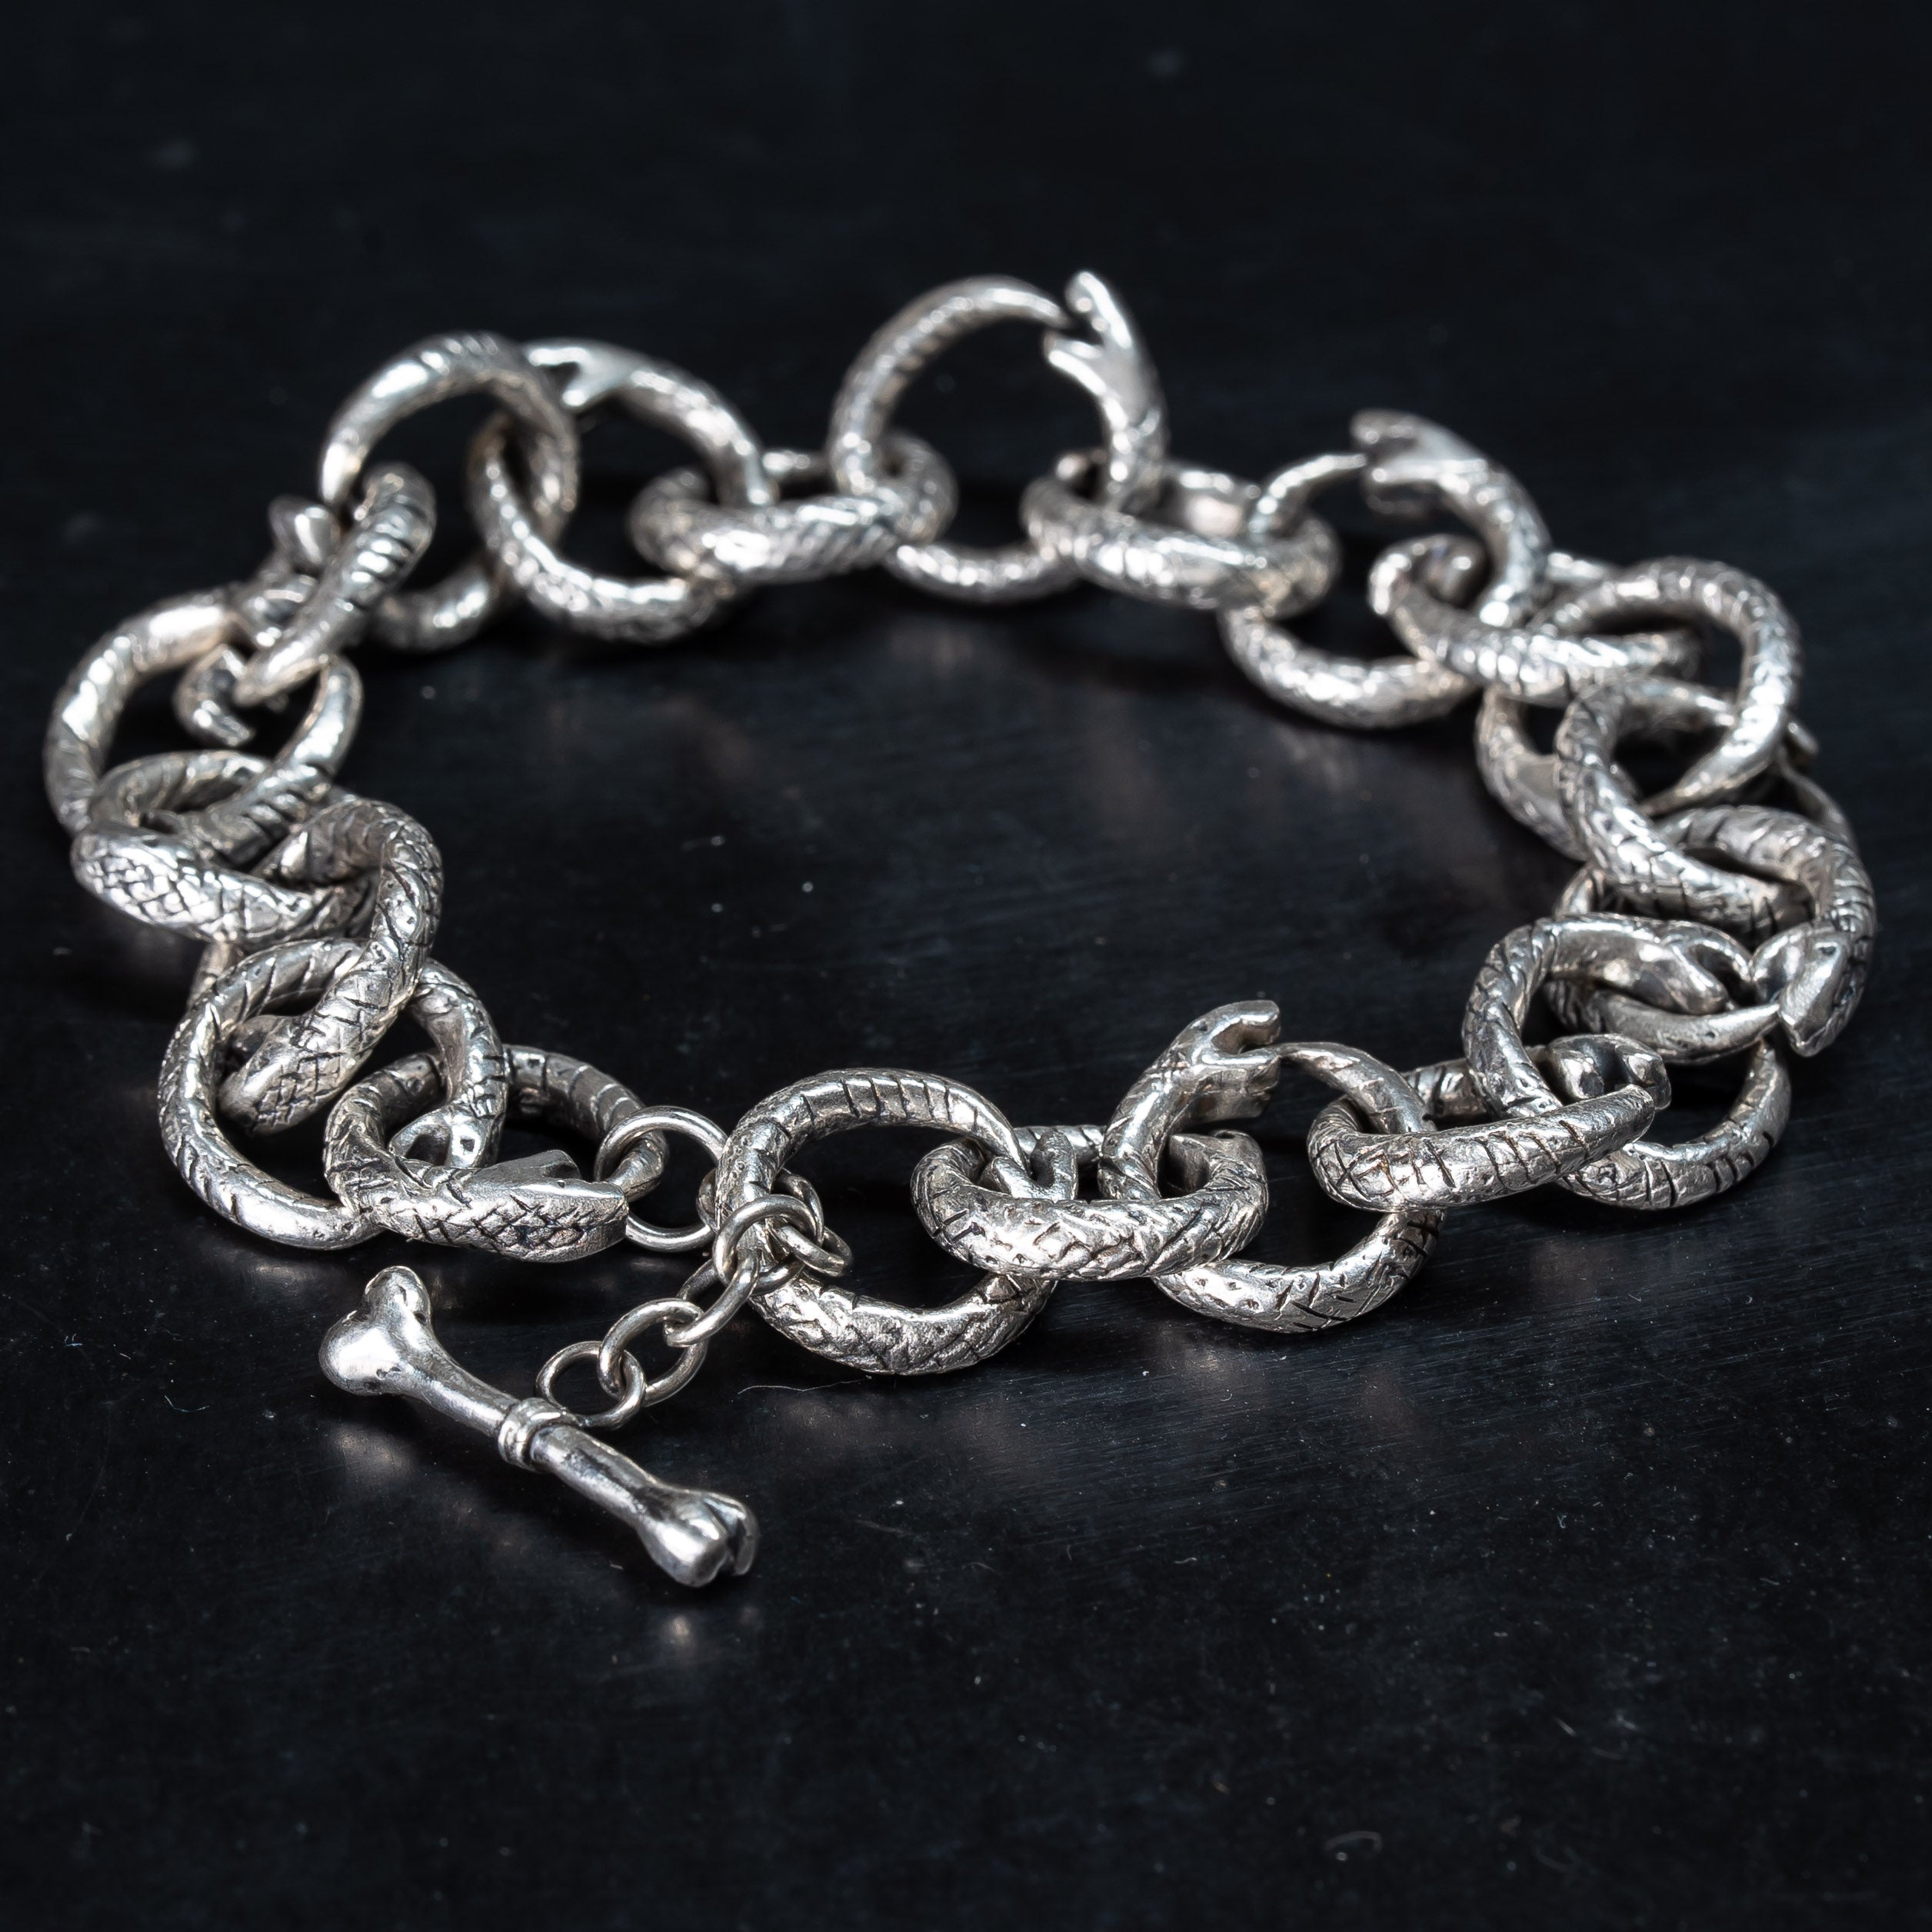  Unique silver bracelet made of individual snakes eating their own tails, otherwise known as the Ouroboros. Gothic style handmade jewellery.